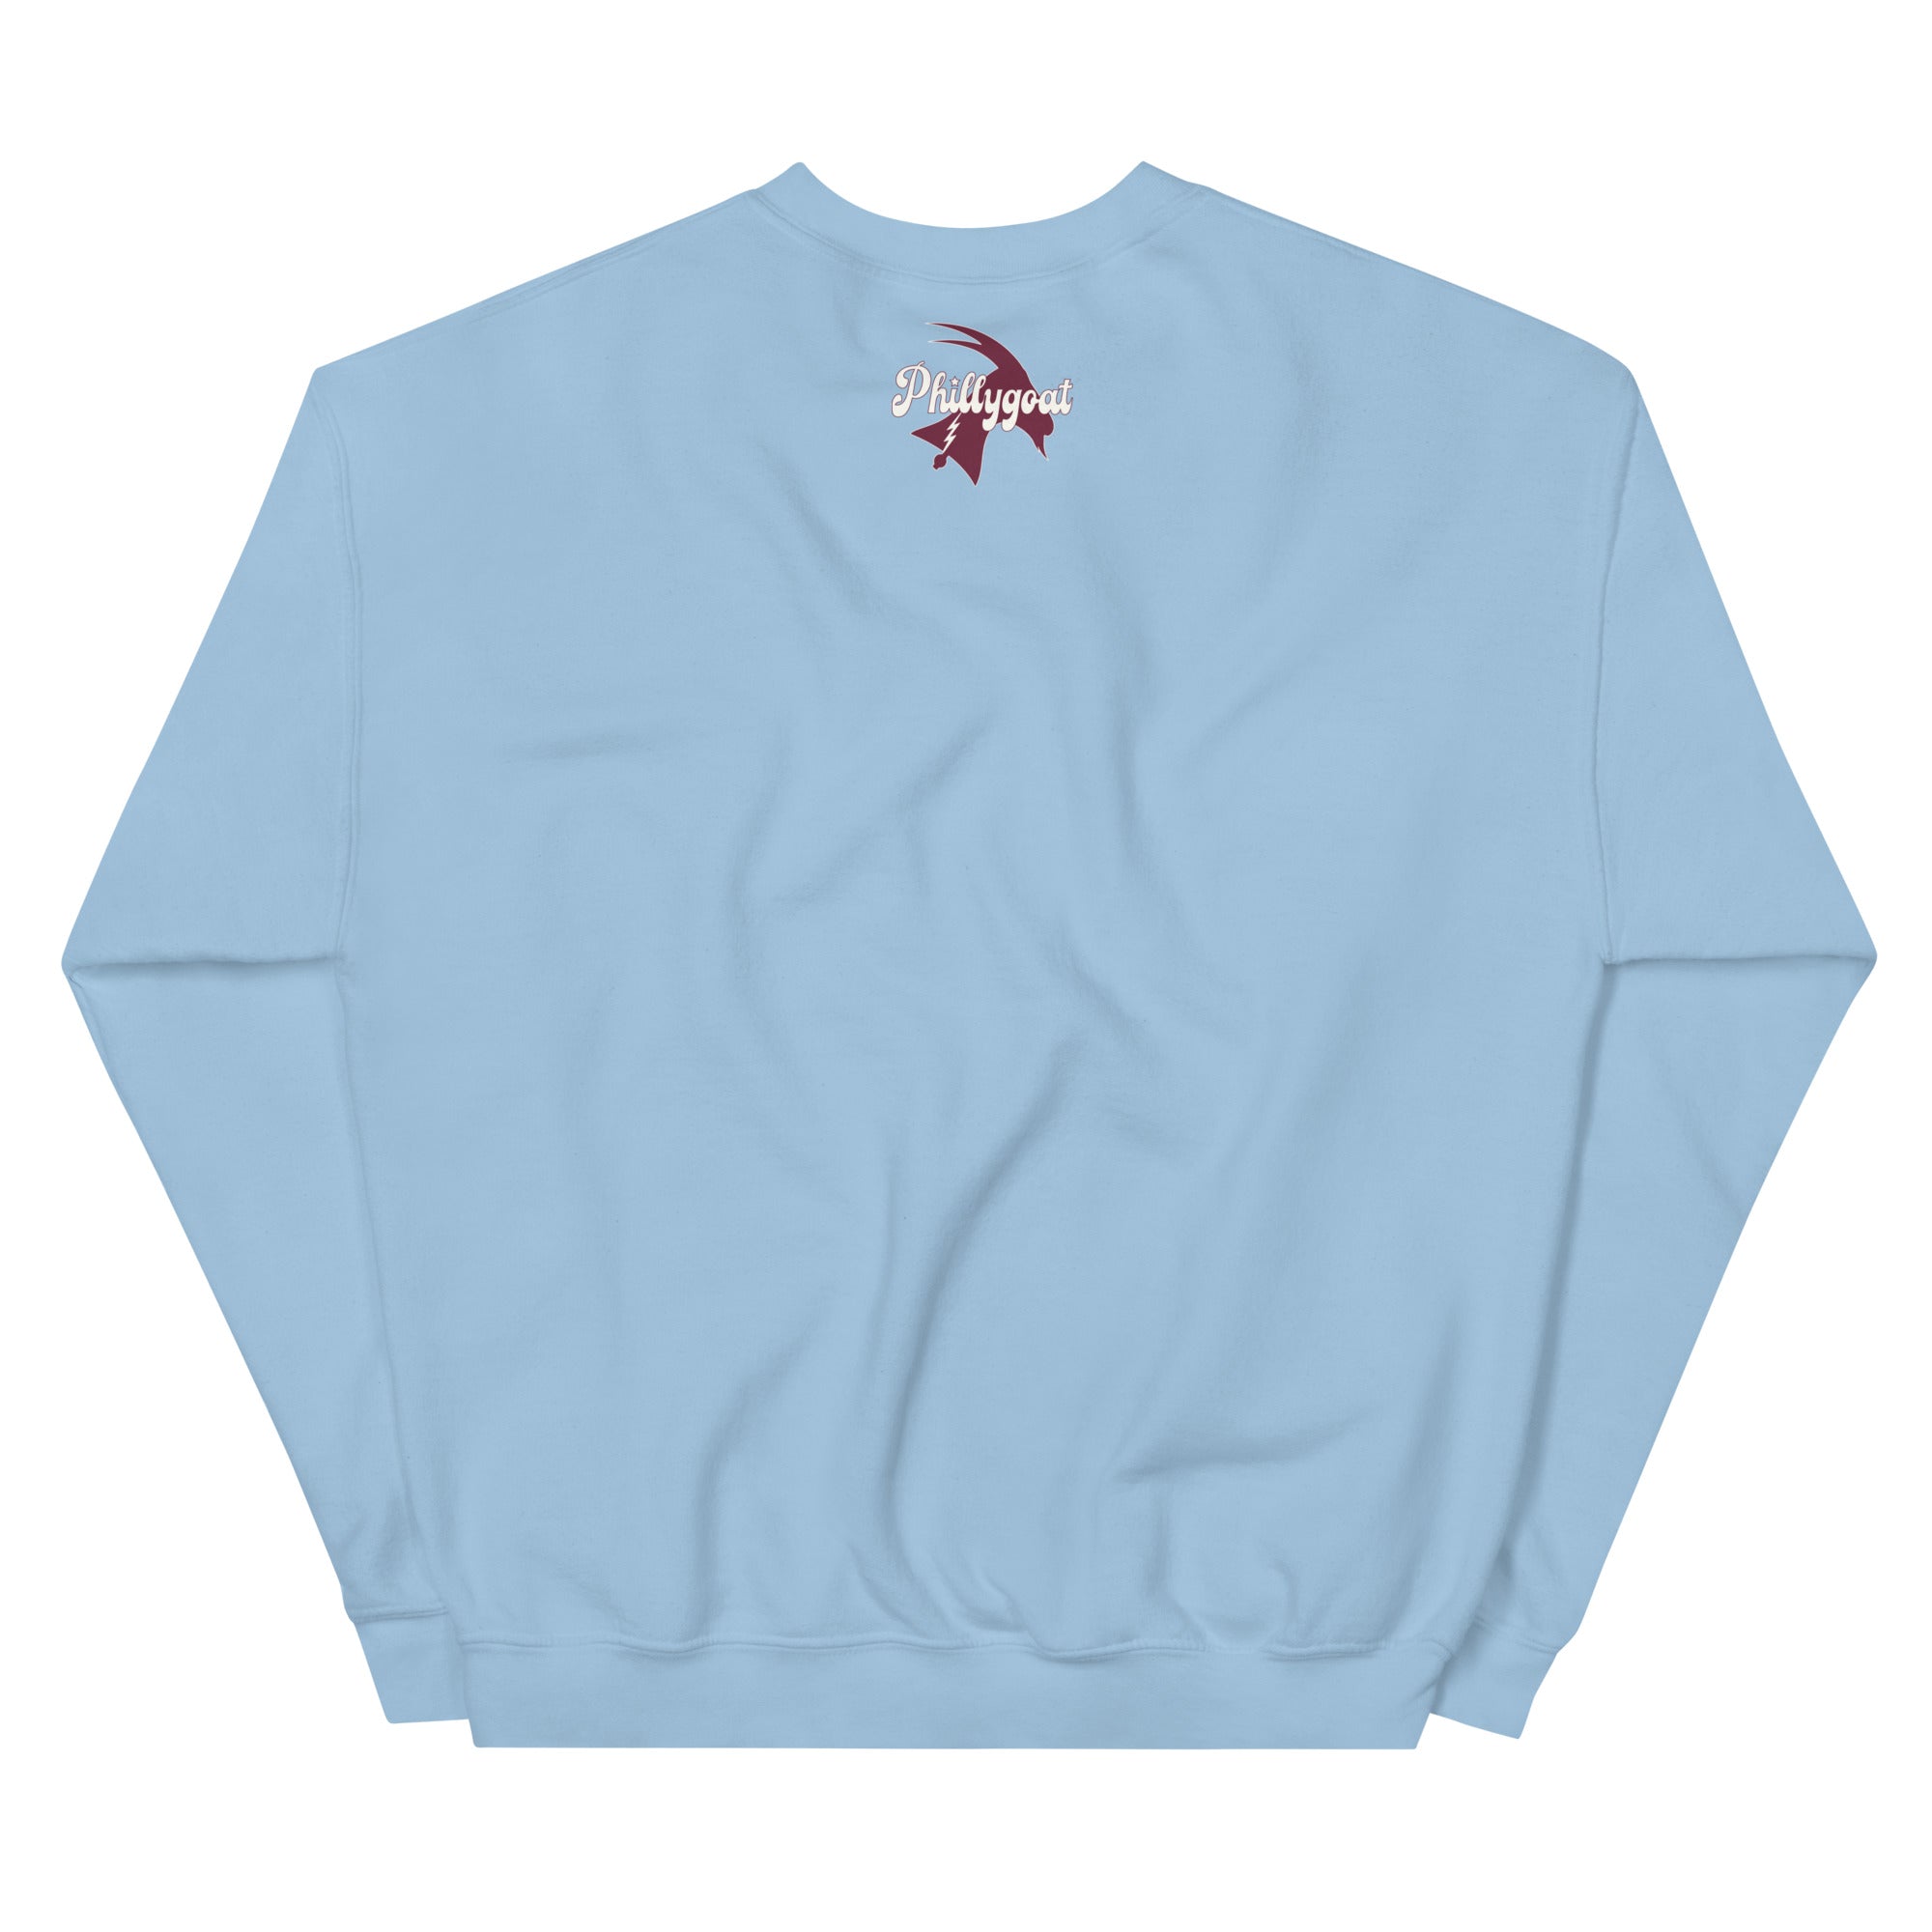 "Philly vs. All Youse" Sweatshirt